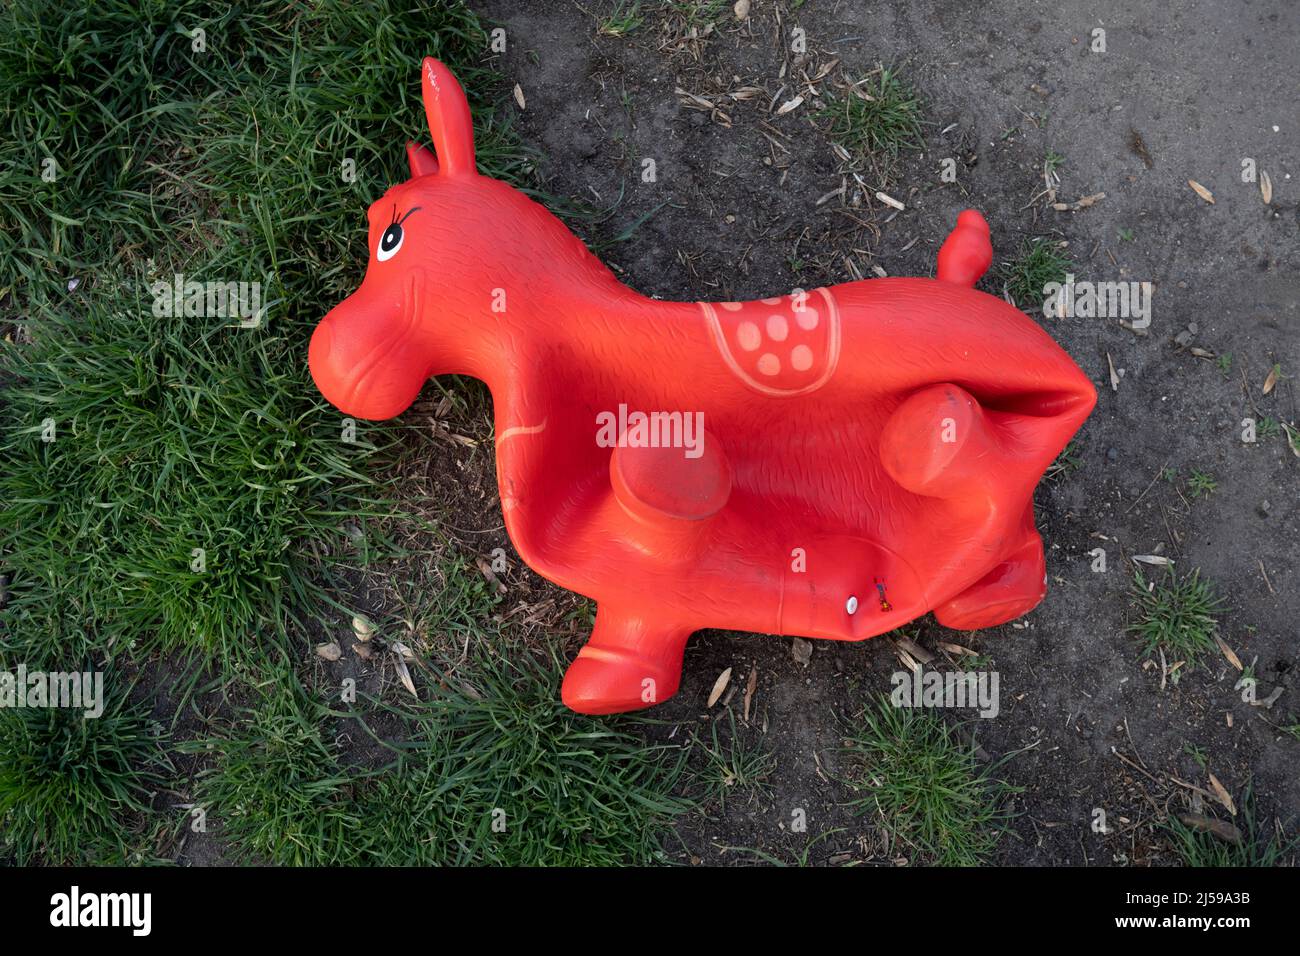 An inflatable child's toy lies discarded on the ground in Ruskin Park, a south London green space in Lambeth, on 21st April 2022, in London, England. Stock Photo